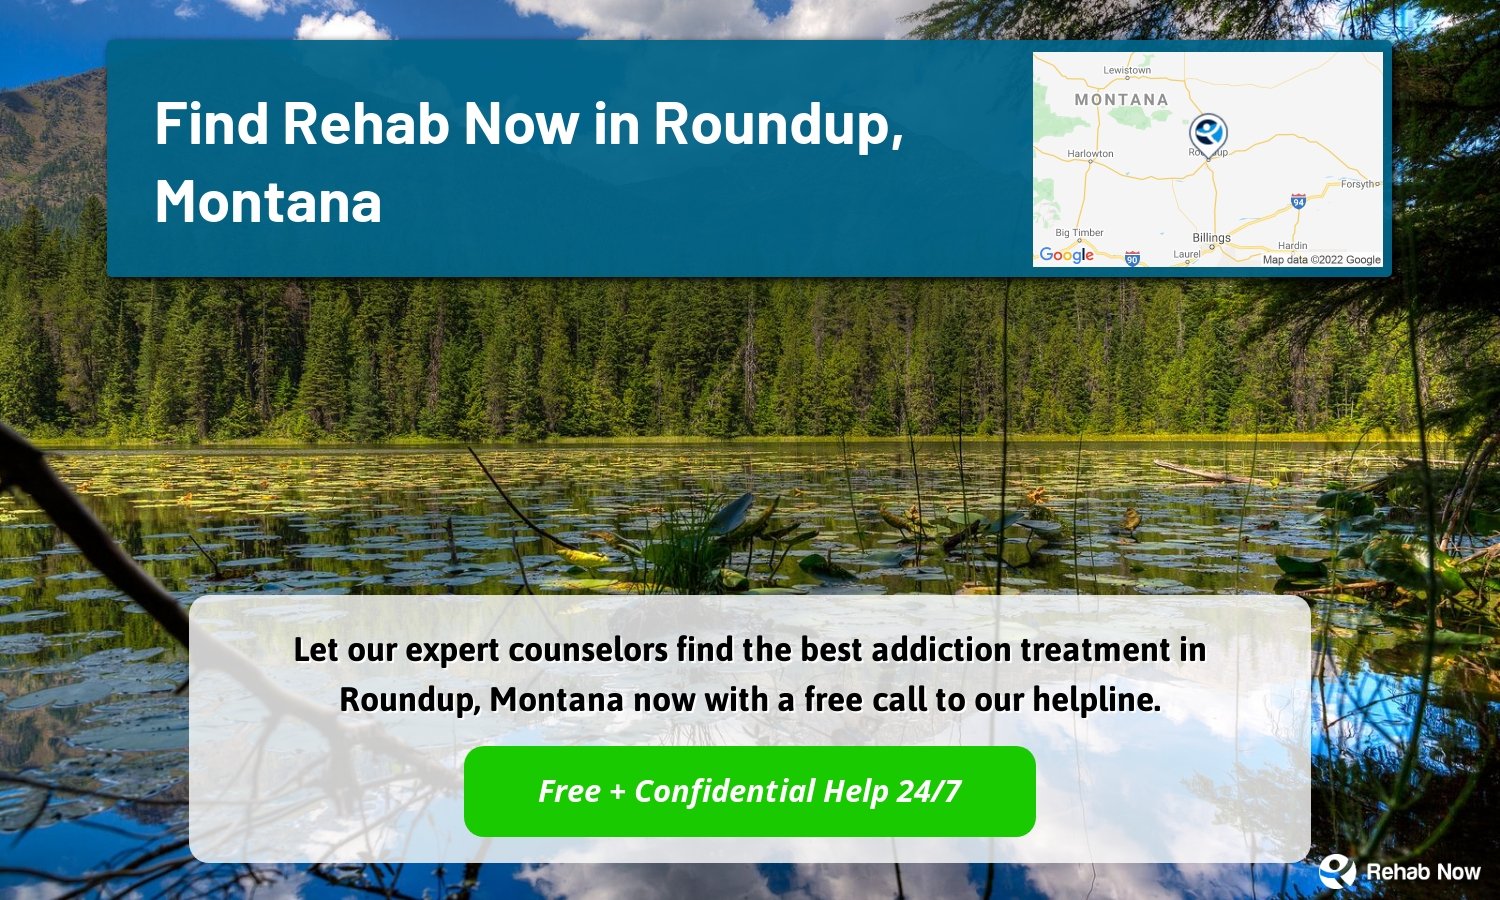 Let our expert counselors find the best addiction treatment in Roundup, Montana now with a free call to our helpline.